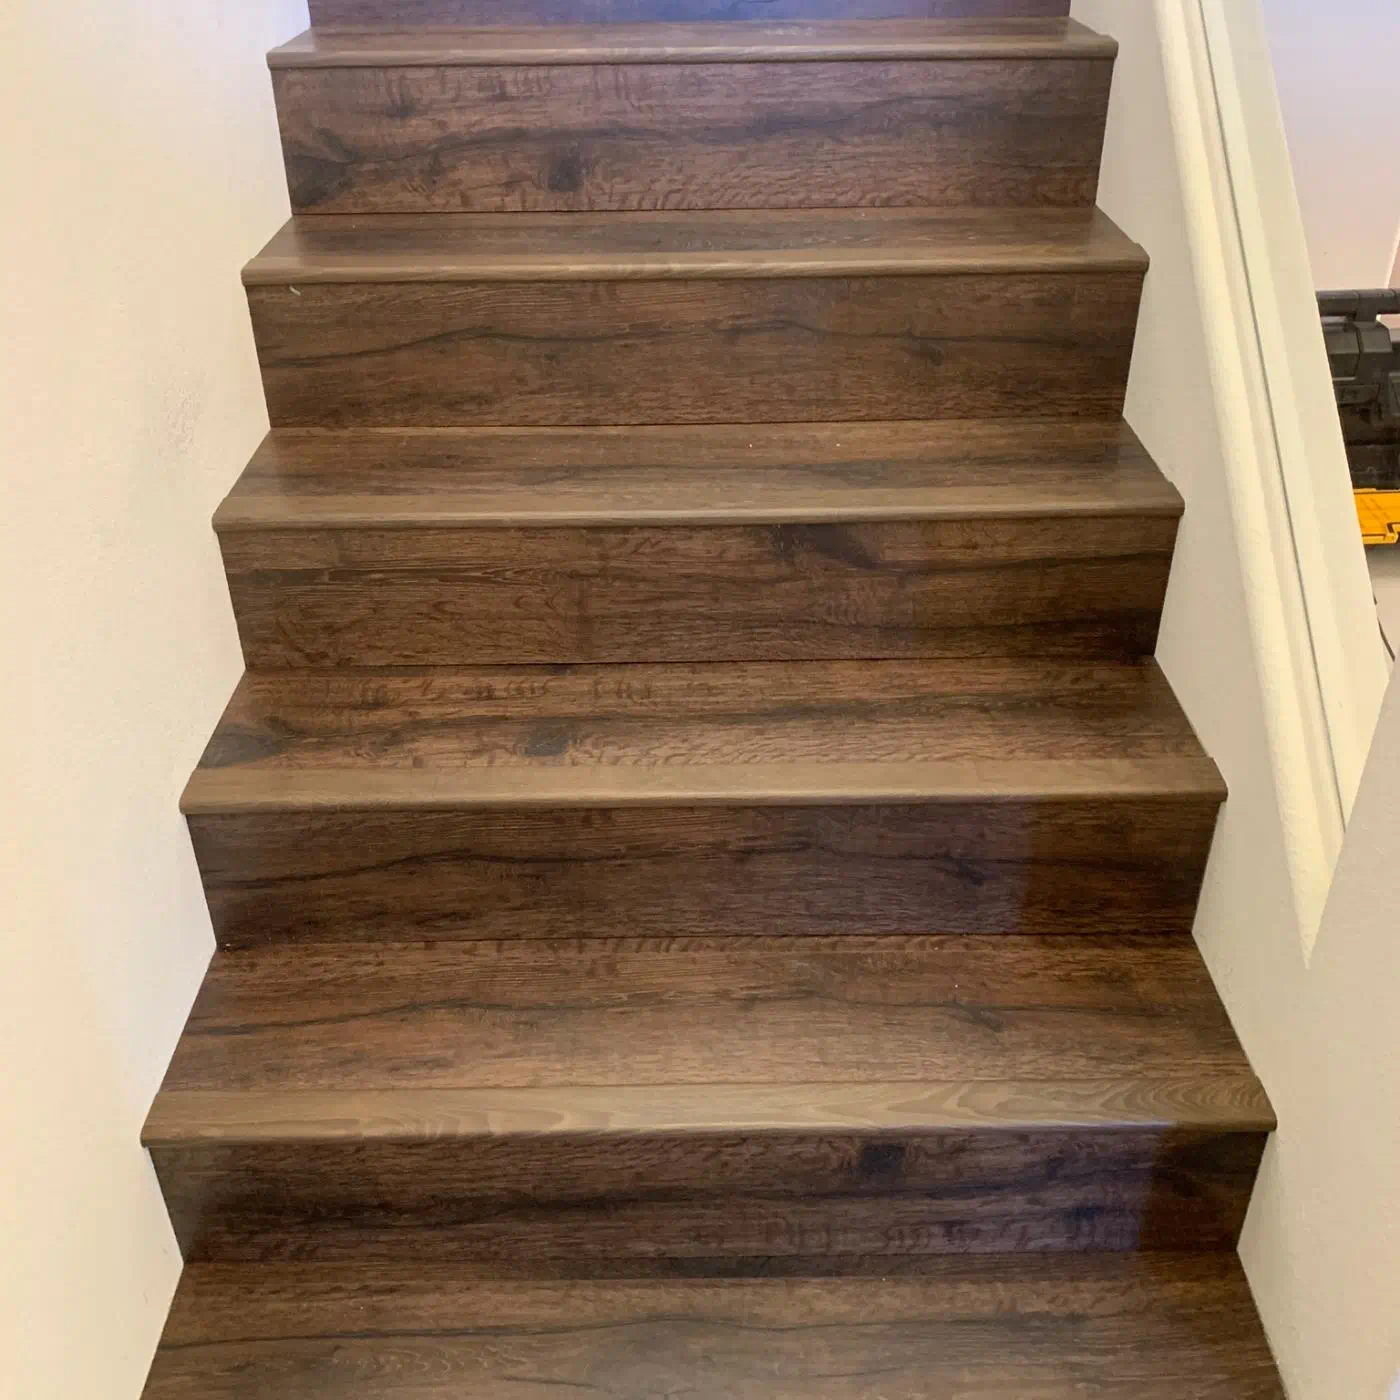 Flooring And Stairs Remodel Prosource, Can You Get Laminate Flooring For Stairs